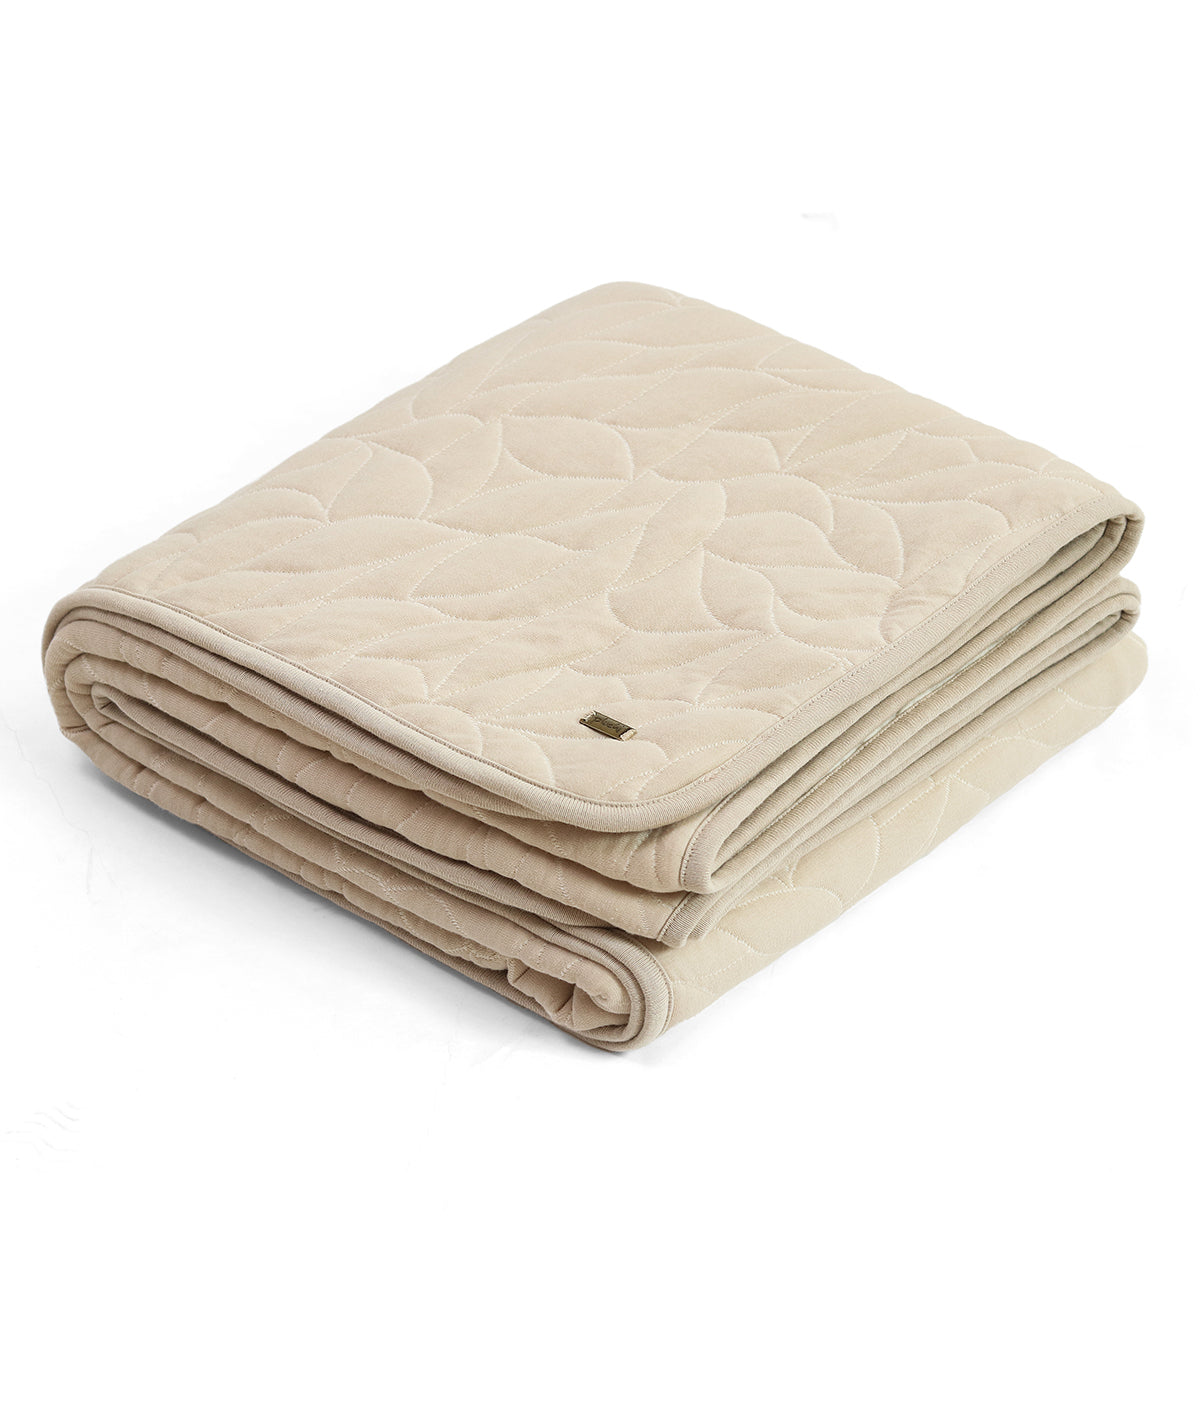 Garden Beauty Cotton Knitted Single Bed Dohar / Quilt (Pale Whisper & Natural)